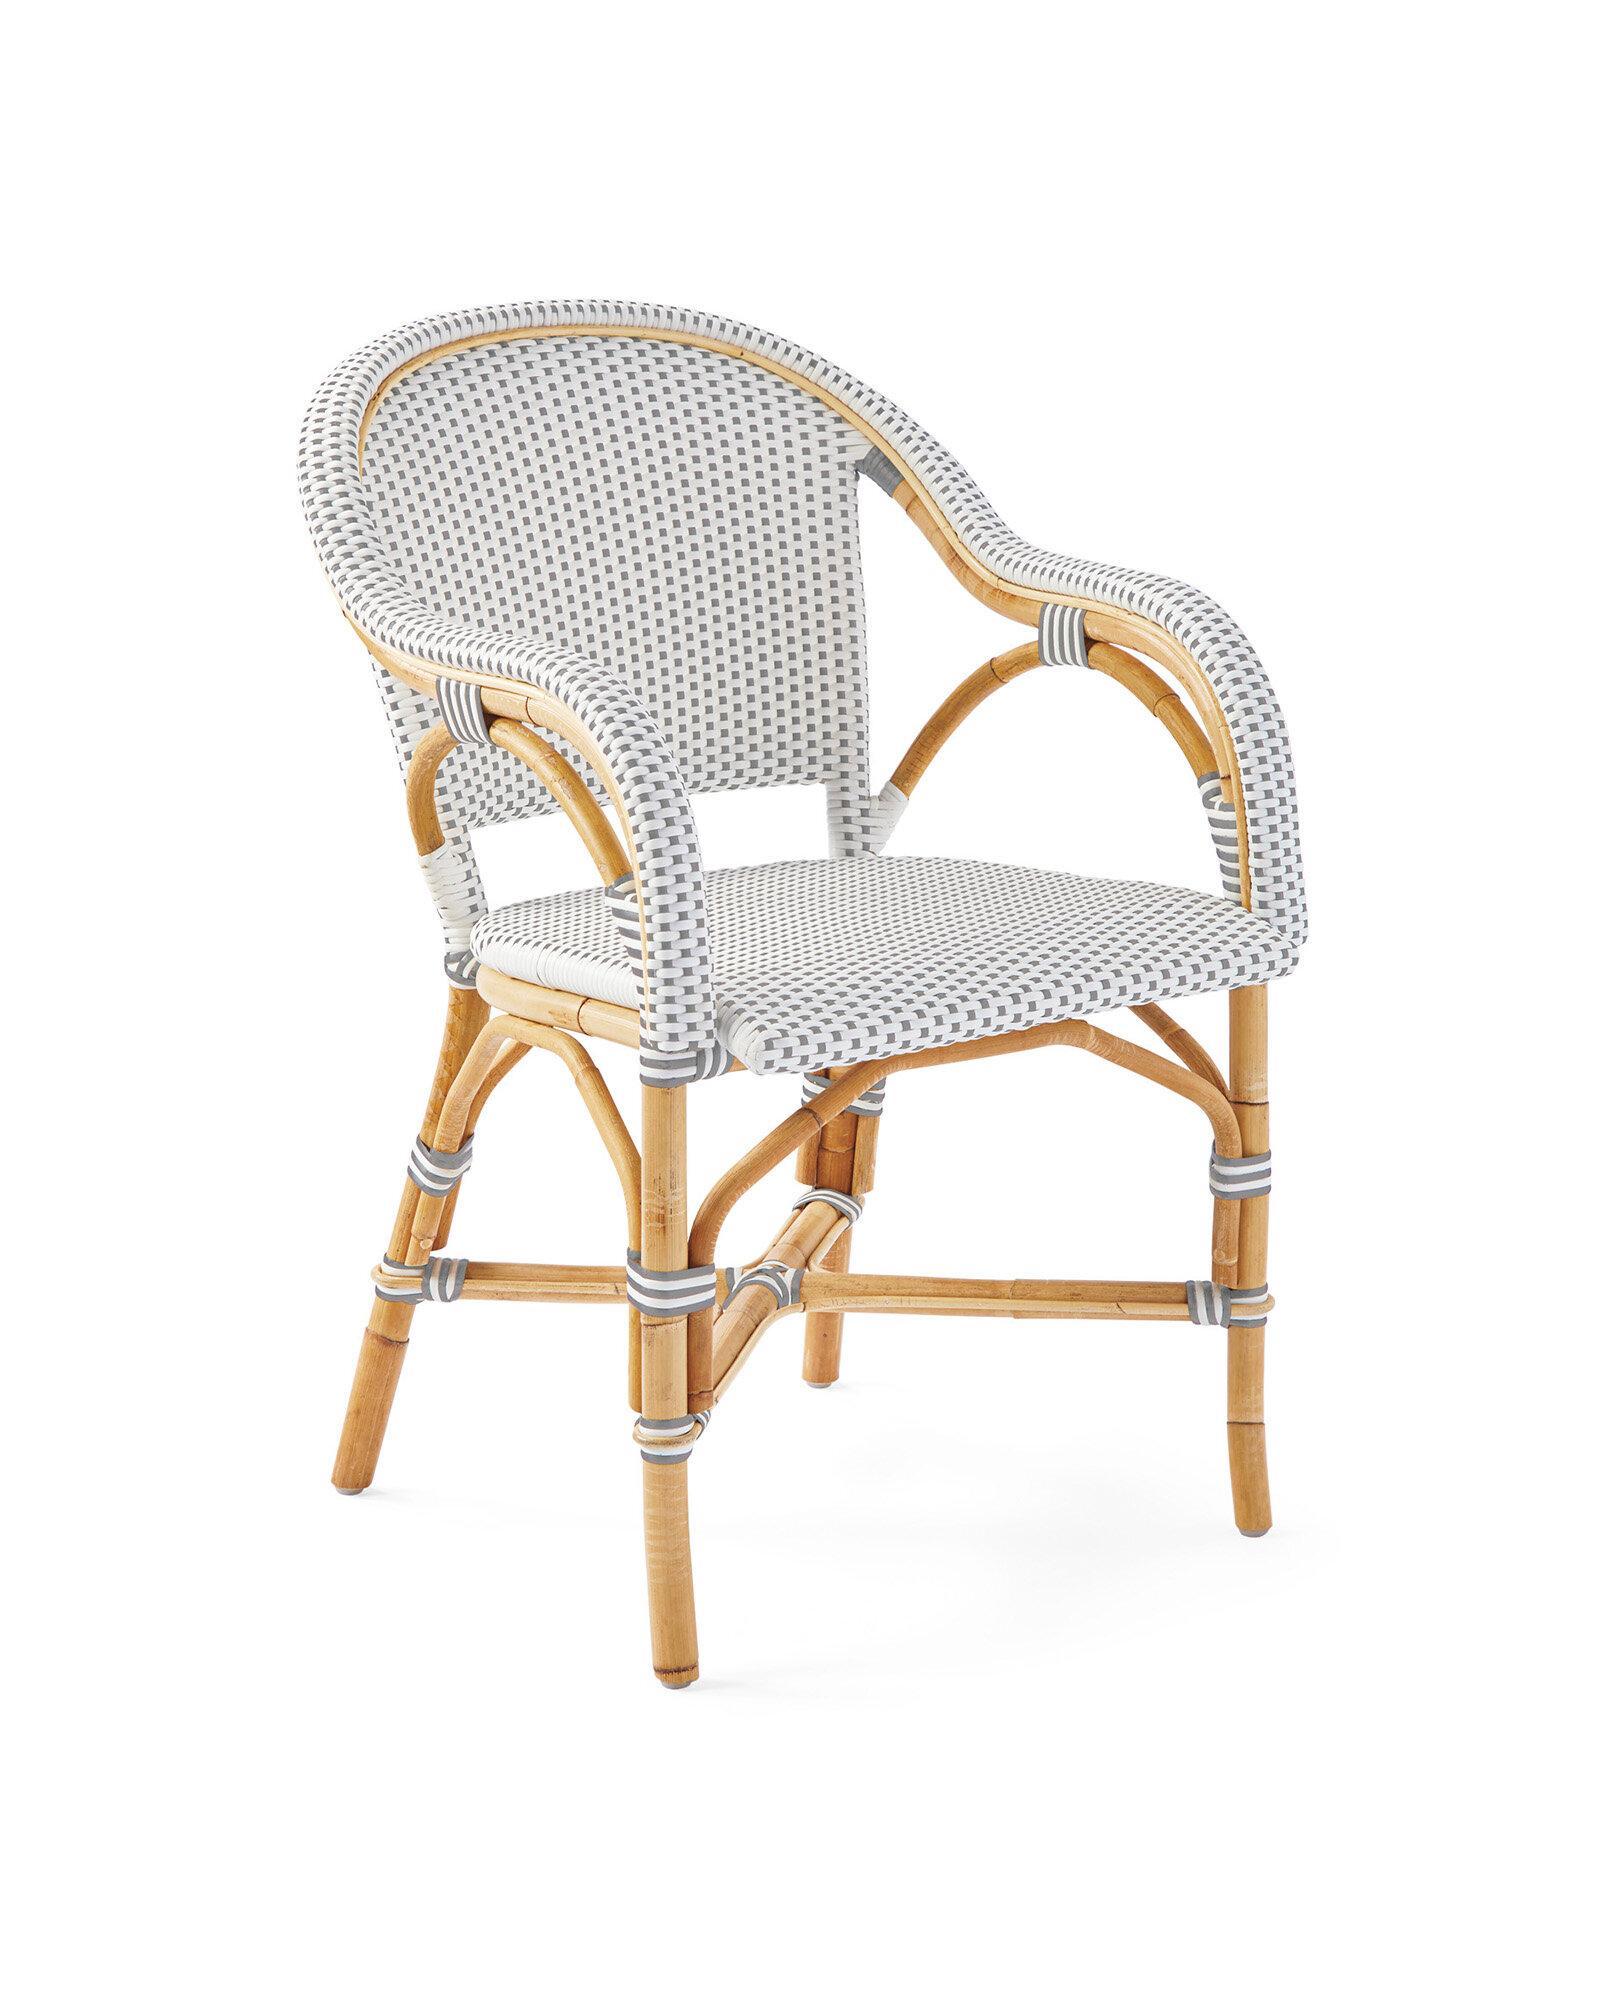 Serena &amp; Lily - Riviera Dining Chair - $348